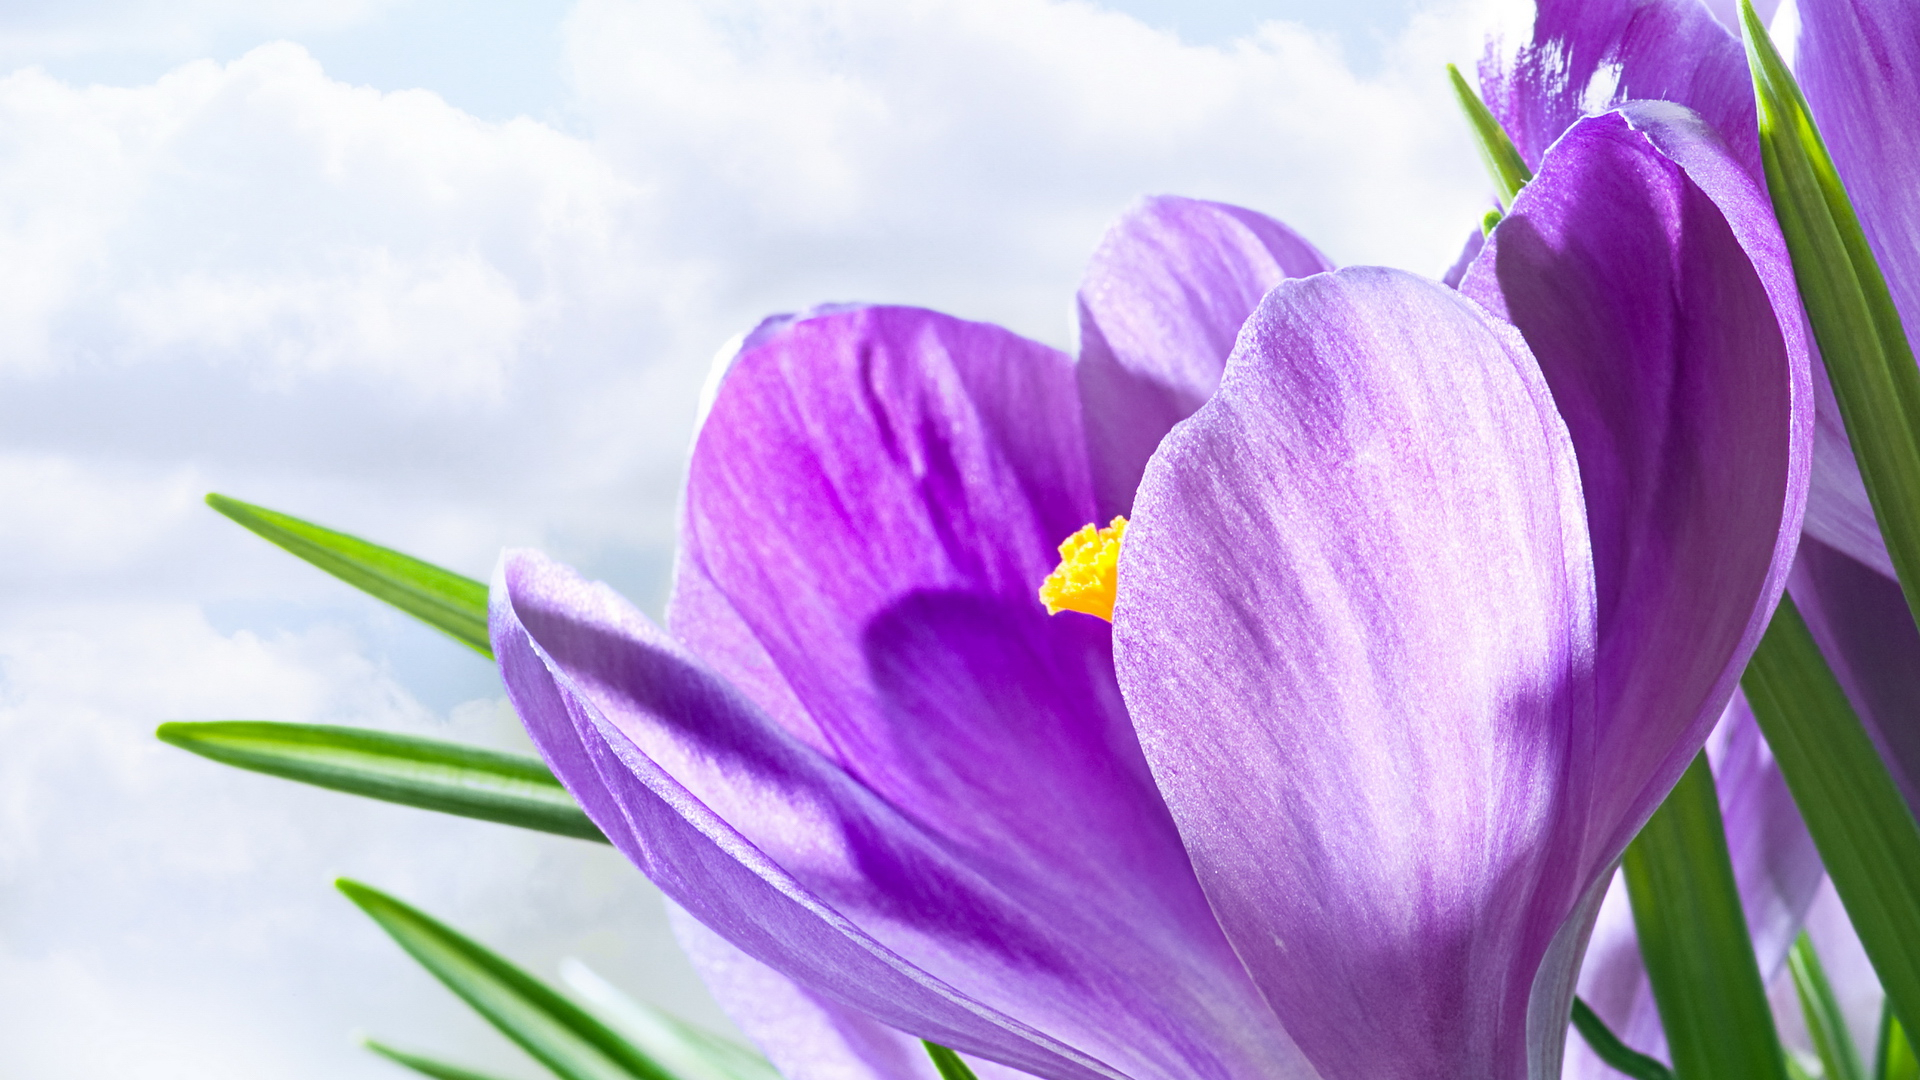 Flowers Hd Wallpapers Full Size - Lavender Flower Images Hd - 1920x1080  Wallpaper 